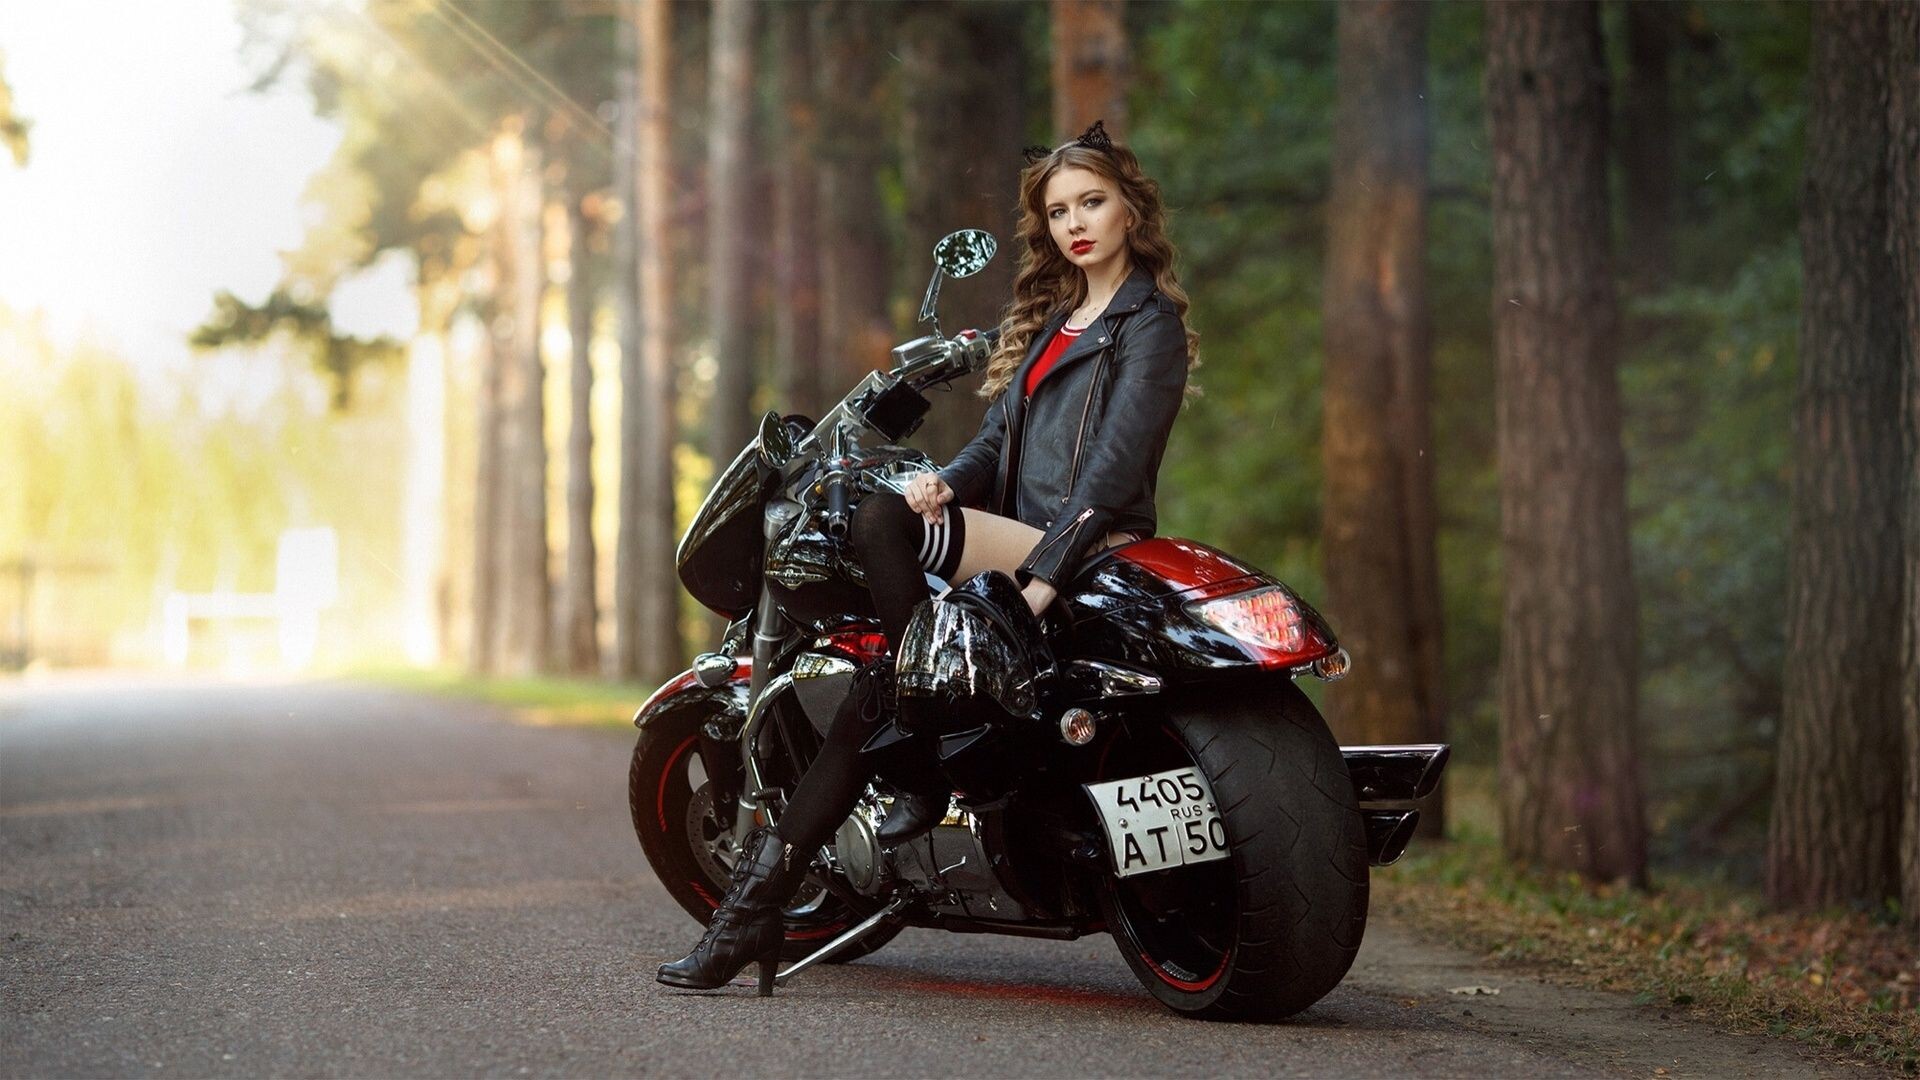 Girls and Motorcycles: Biker girl, Tail and stop light, Chassis, Suspension, A daily commuter bike. 1920x1080 Full HD Background.